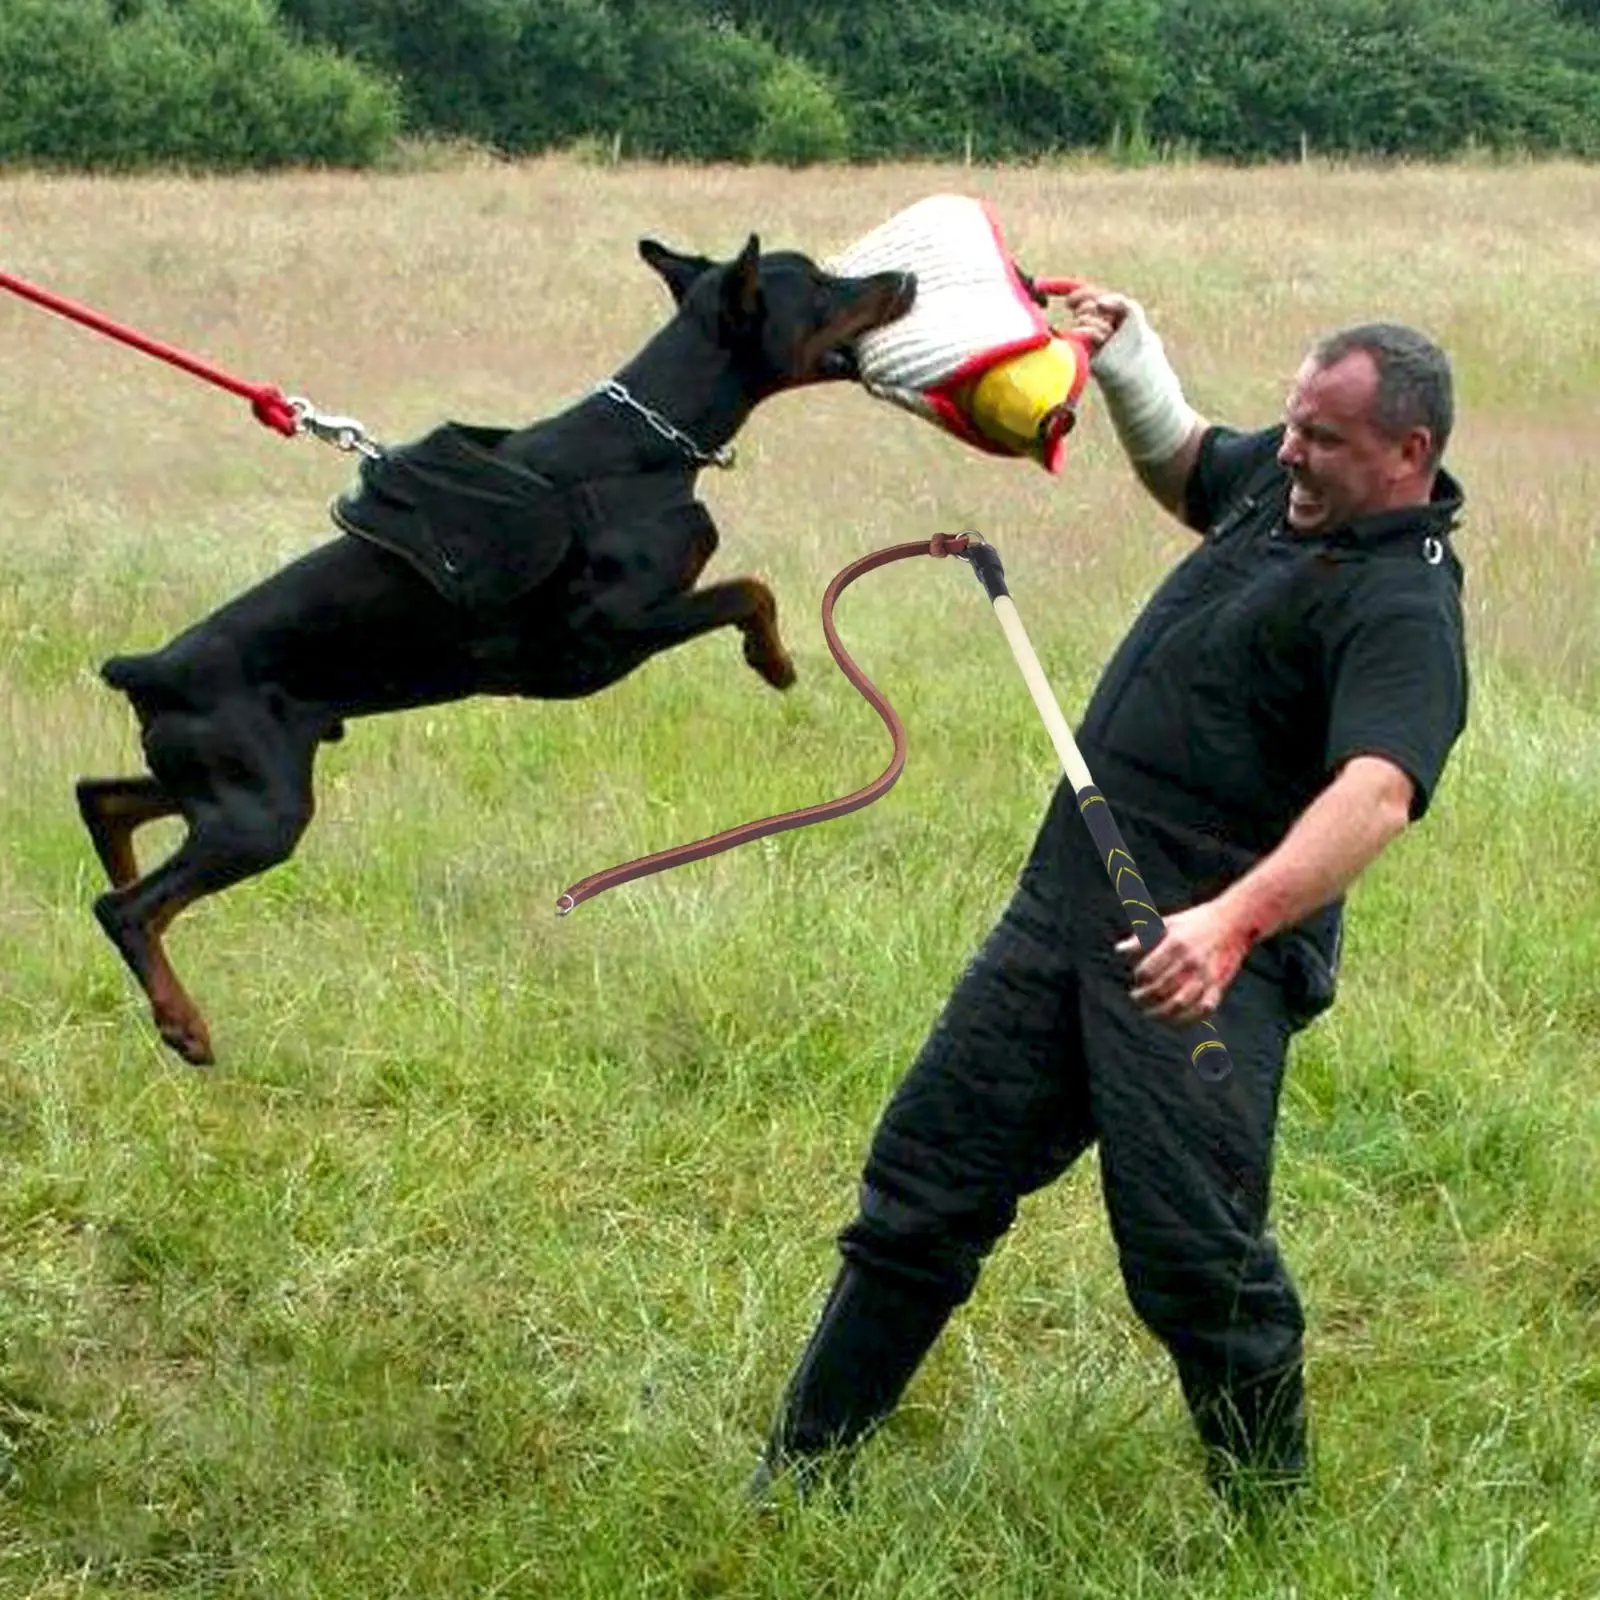 Leather Dog Training Whip Aggressive Pets Exercising with Handle for Medium Large Dogs Entertainment Obedience Equipment Toy